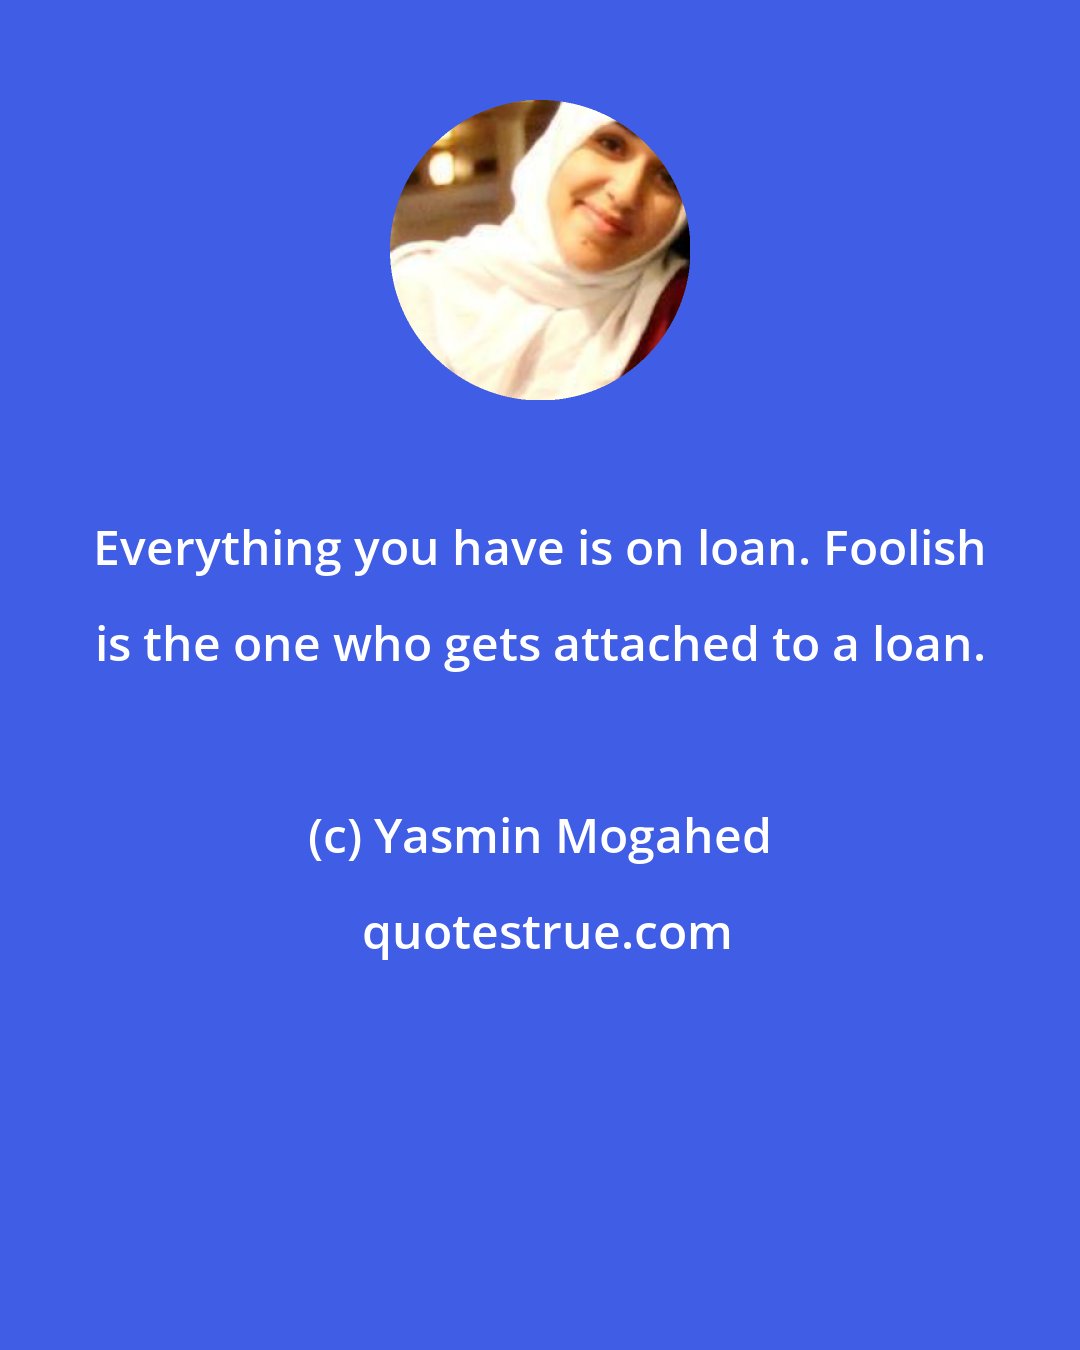 Yasmin Mogahed: Everything you have is on loan. Foolish is the one who gets attached to a loan.